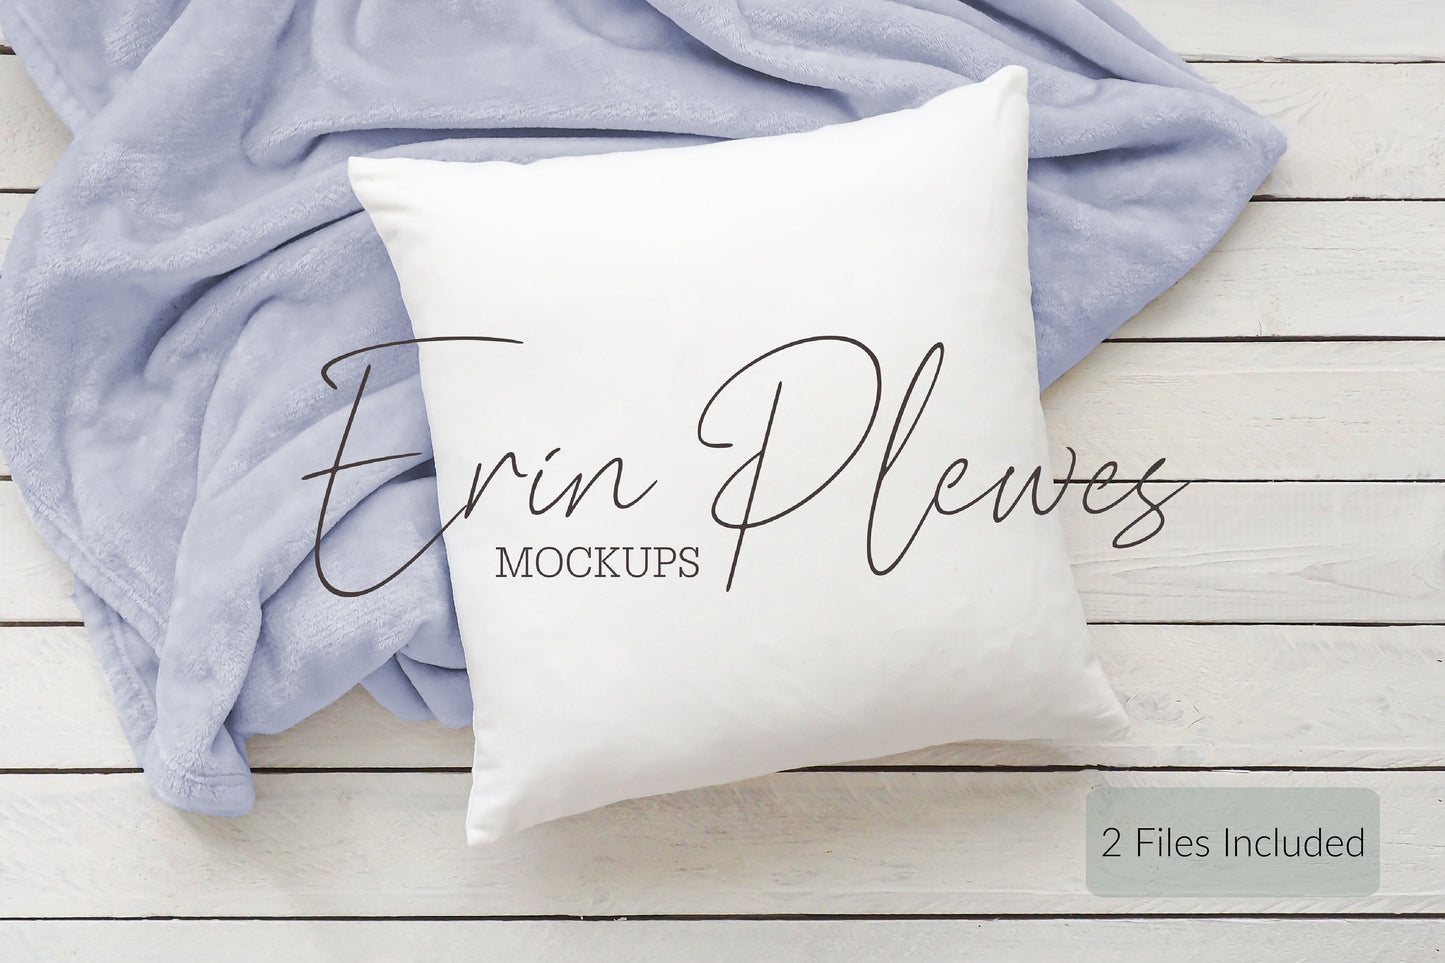 Cushion Mockup PSD Smart Object, Pillow Mock Up, Pillow Slipcover Mock-up with Blue Blanket, Instant Digital Download Jpeg Template